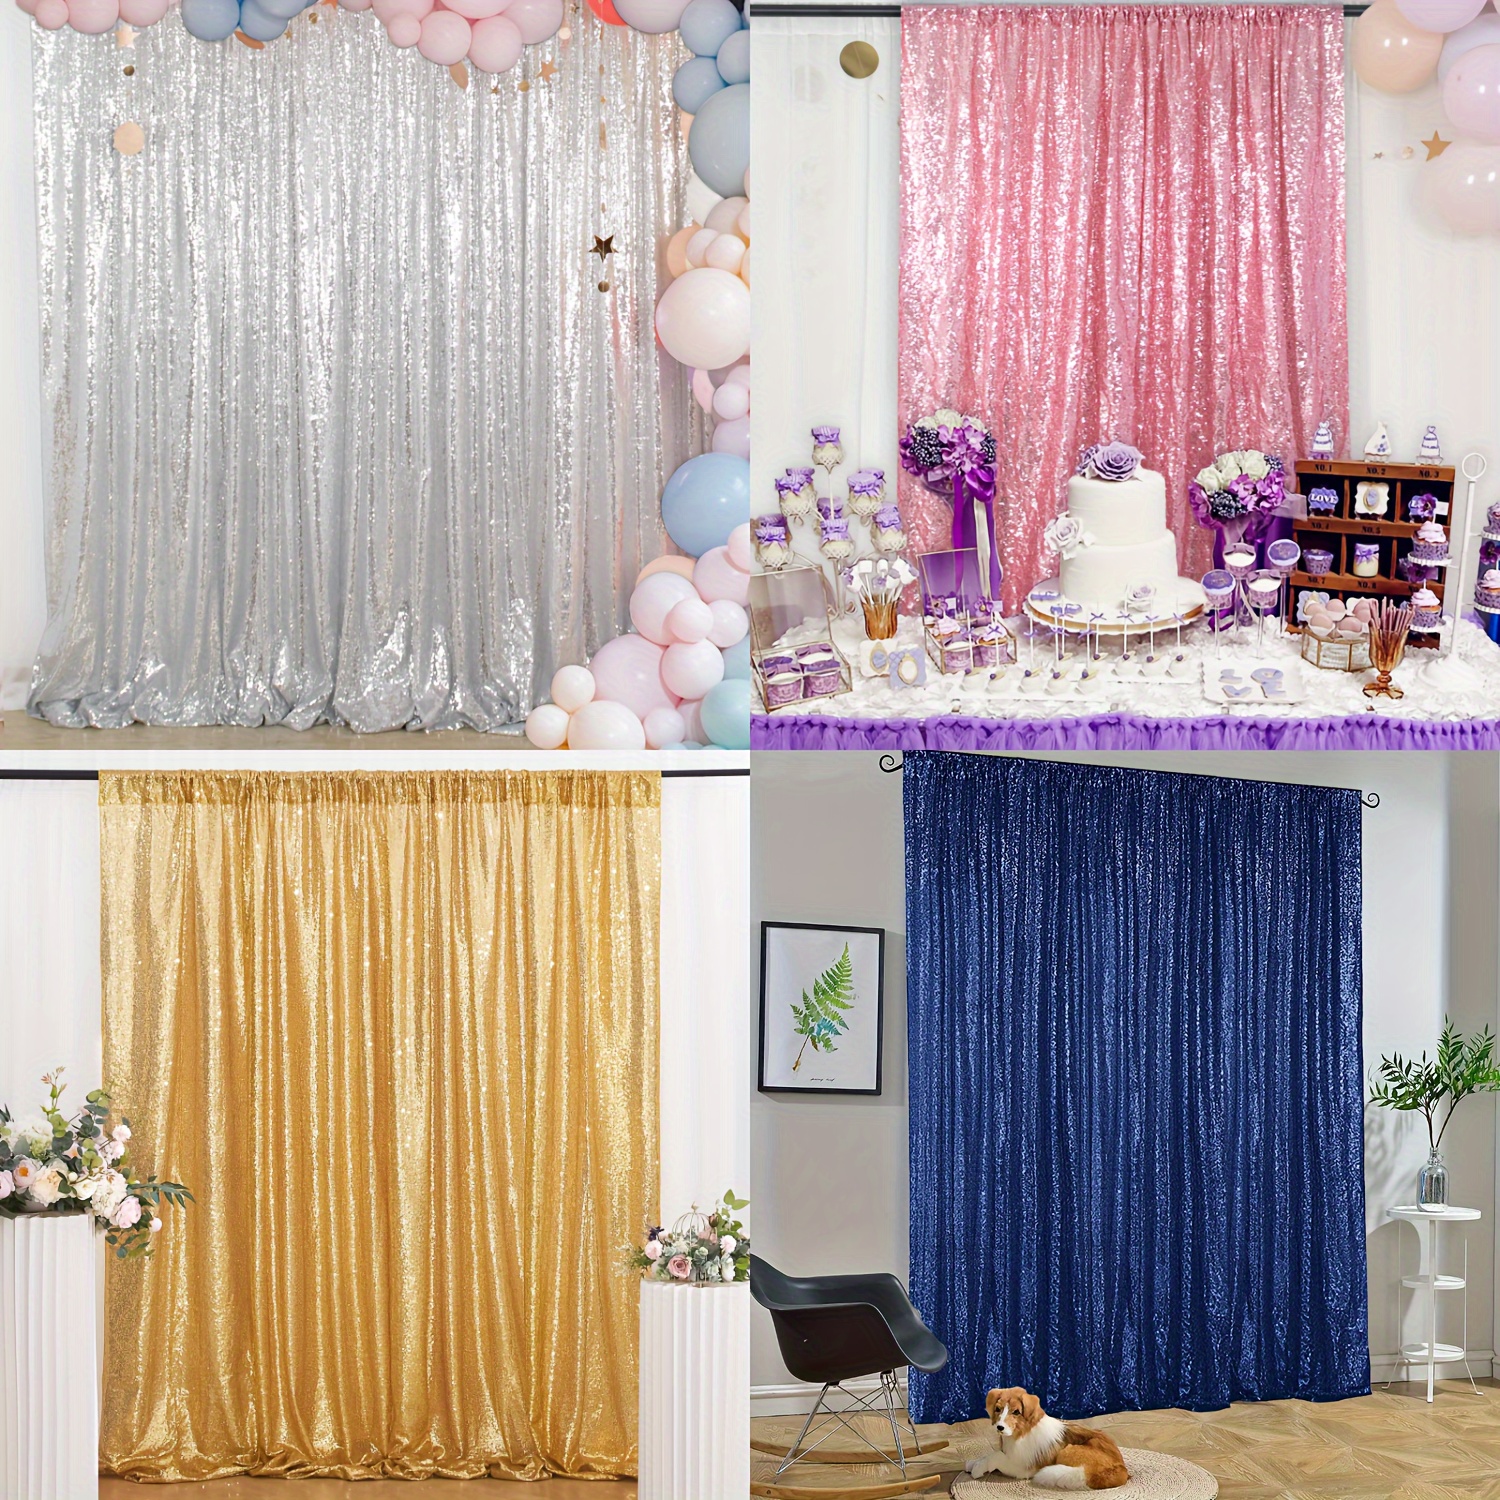 Pink Ballon Party Backdrop Pink Photography Background Glamour